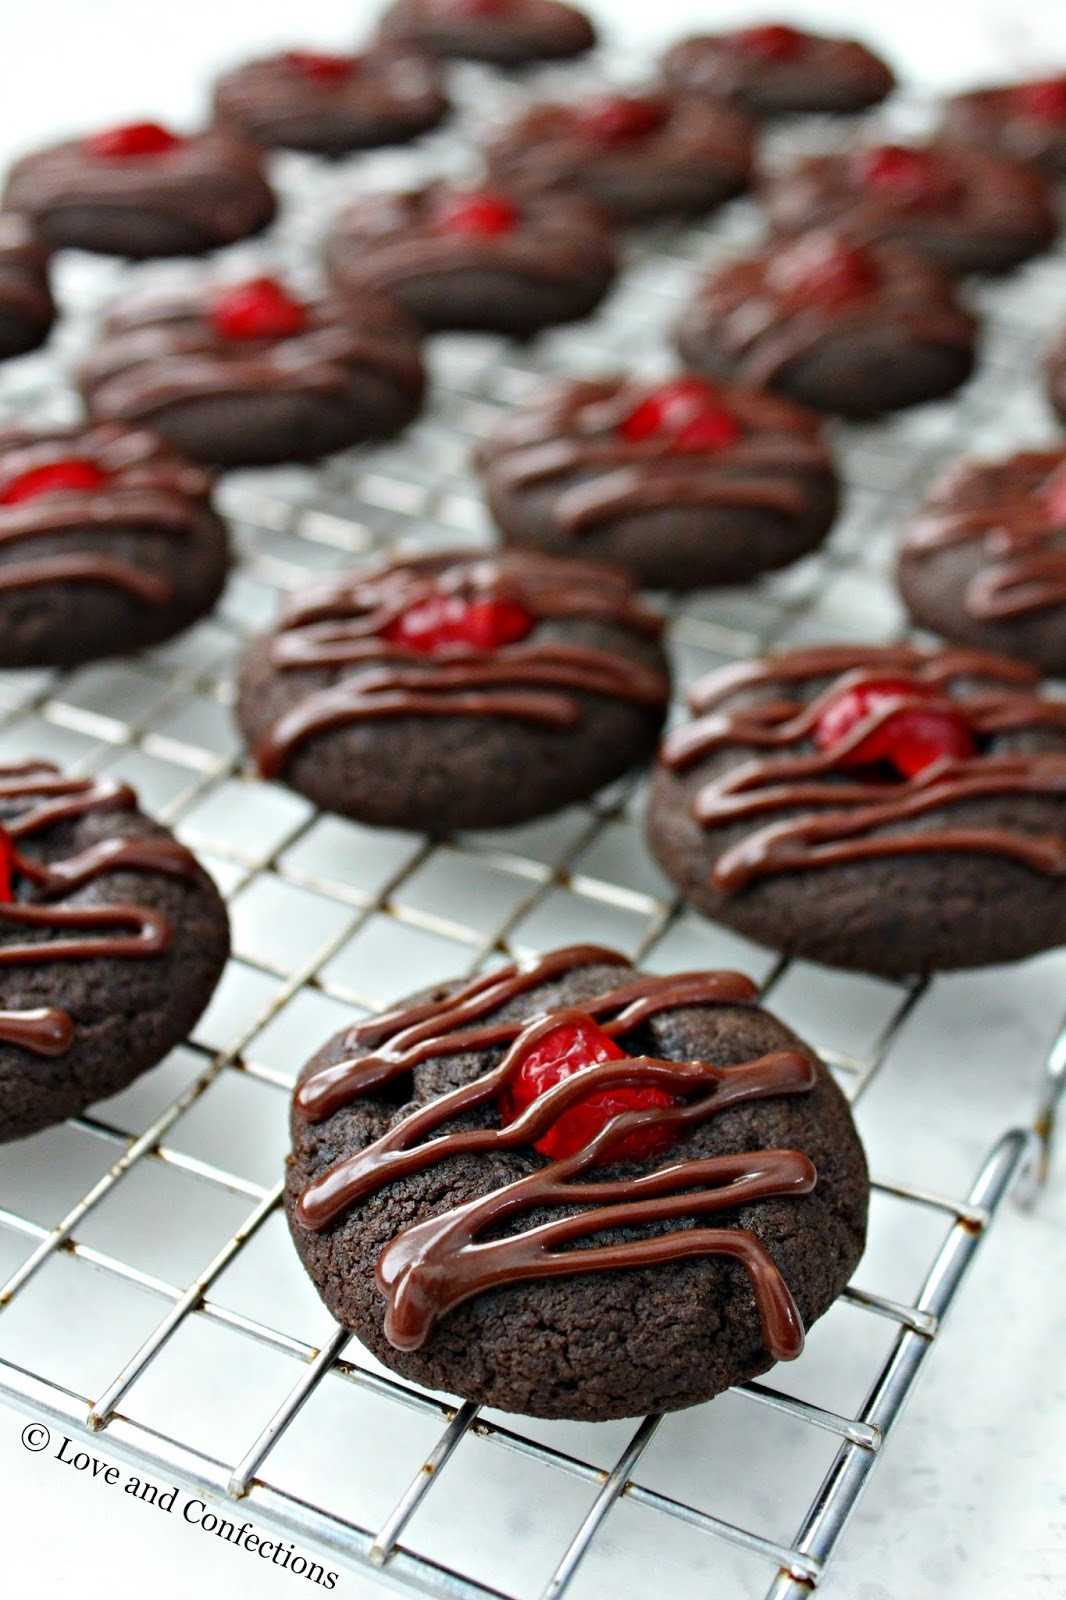 Chocolate Covered Cookies Fresh Love and Confections Chocolate Covered Cherry Cookies